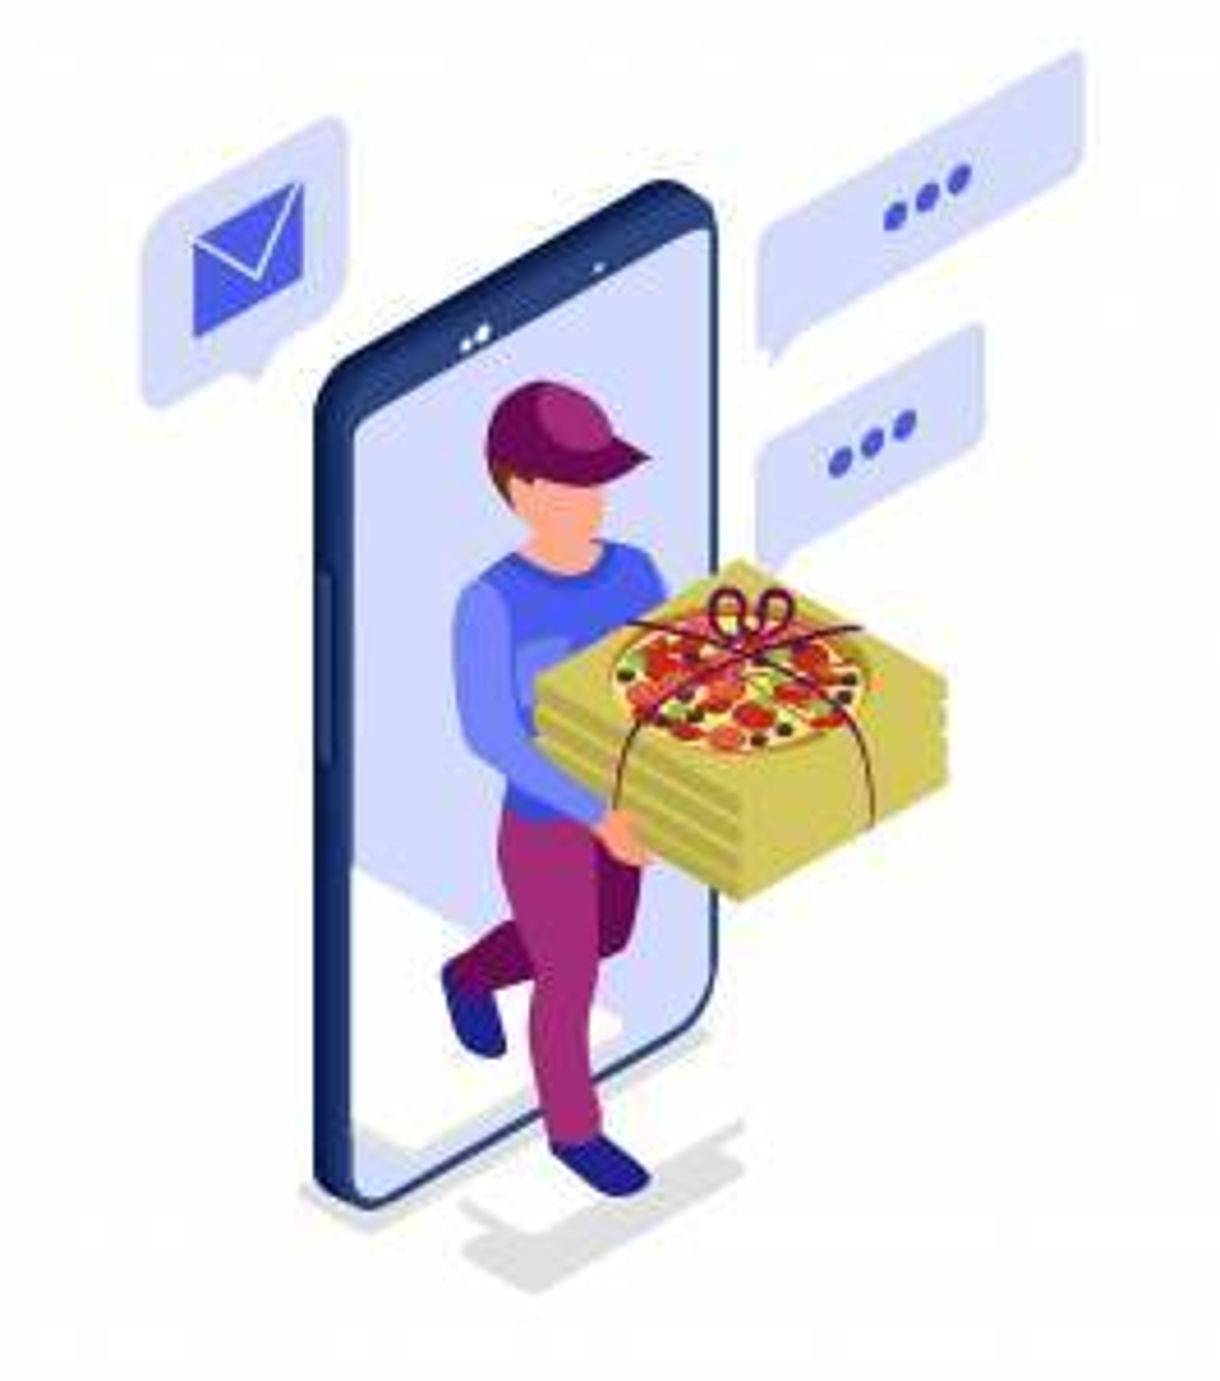 graphic illustration of a pizza delivery mobile app